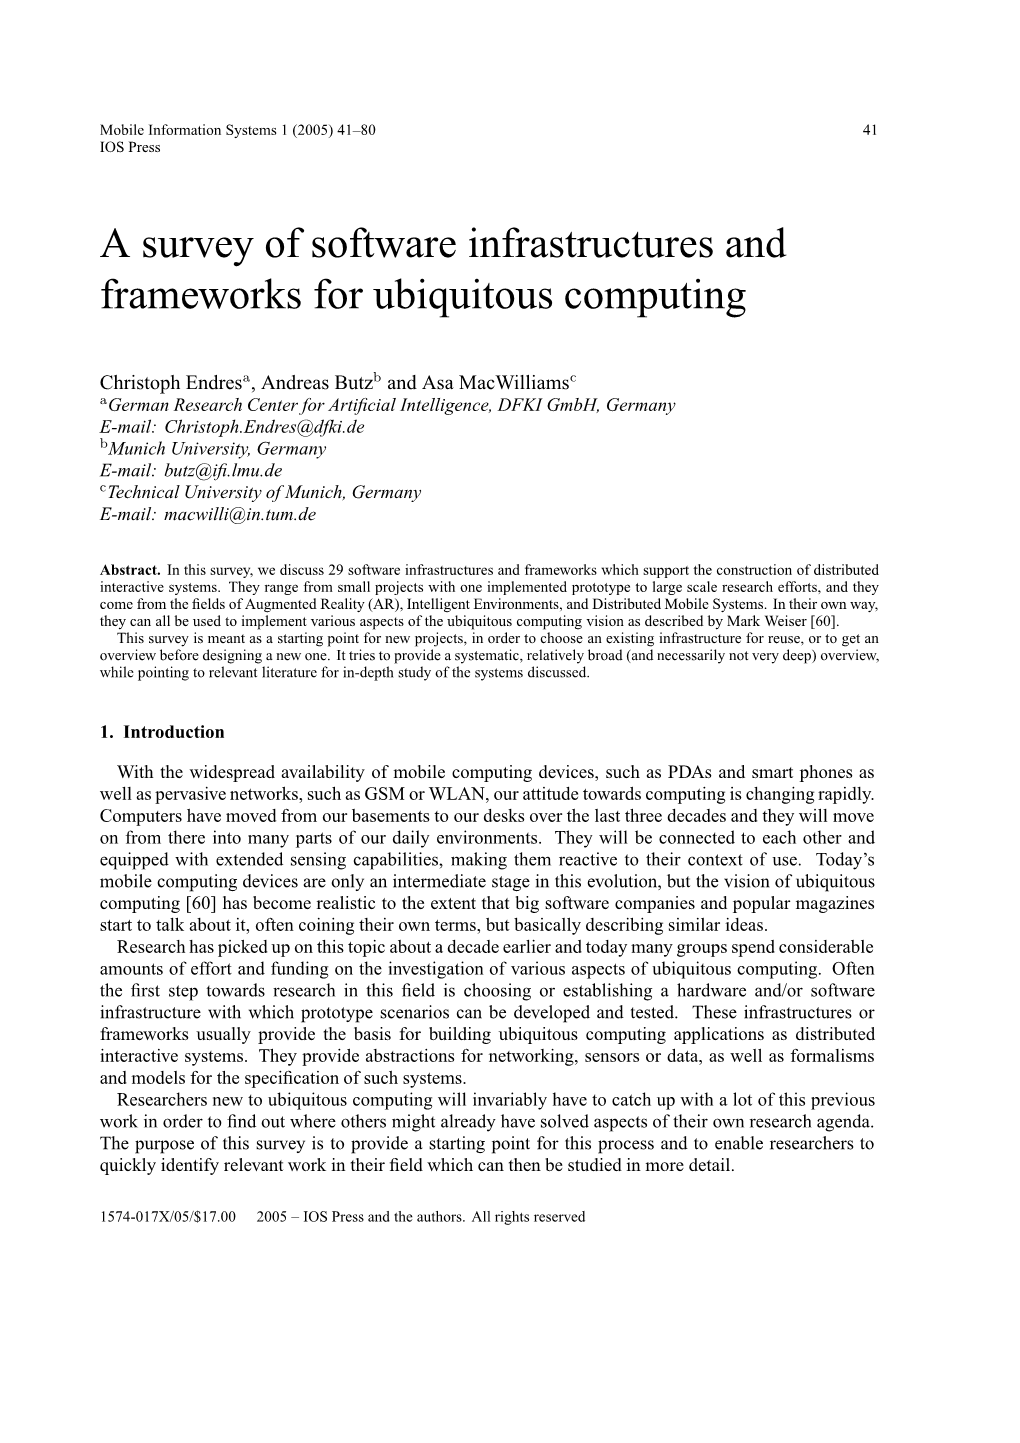 A Survey of Software Infrastructures and Frameworks for Ubiquitous Computing